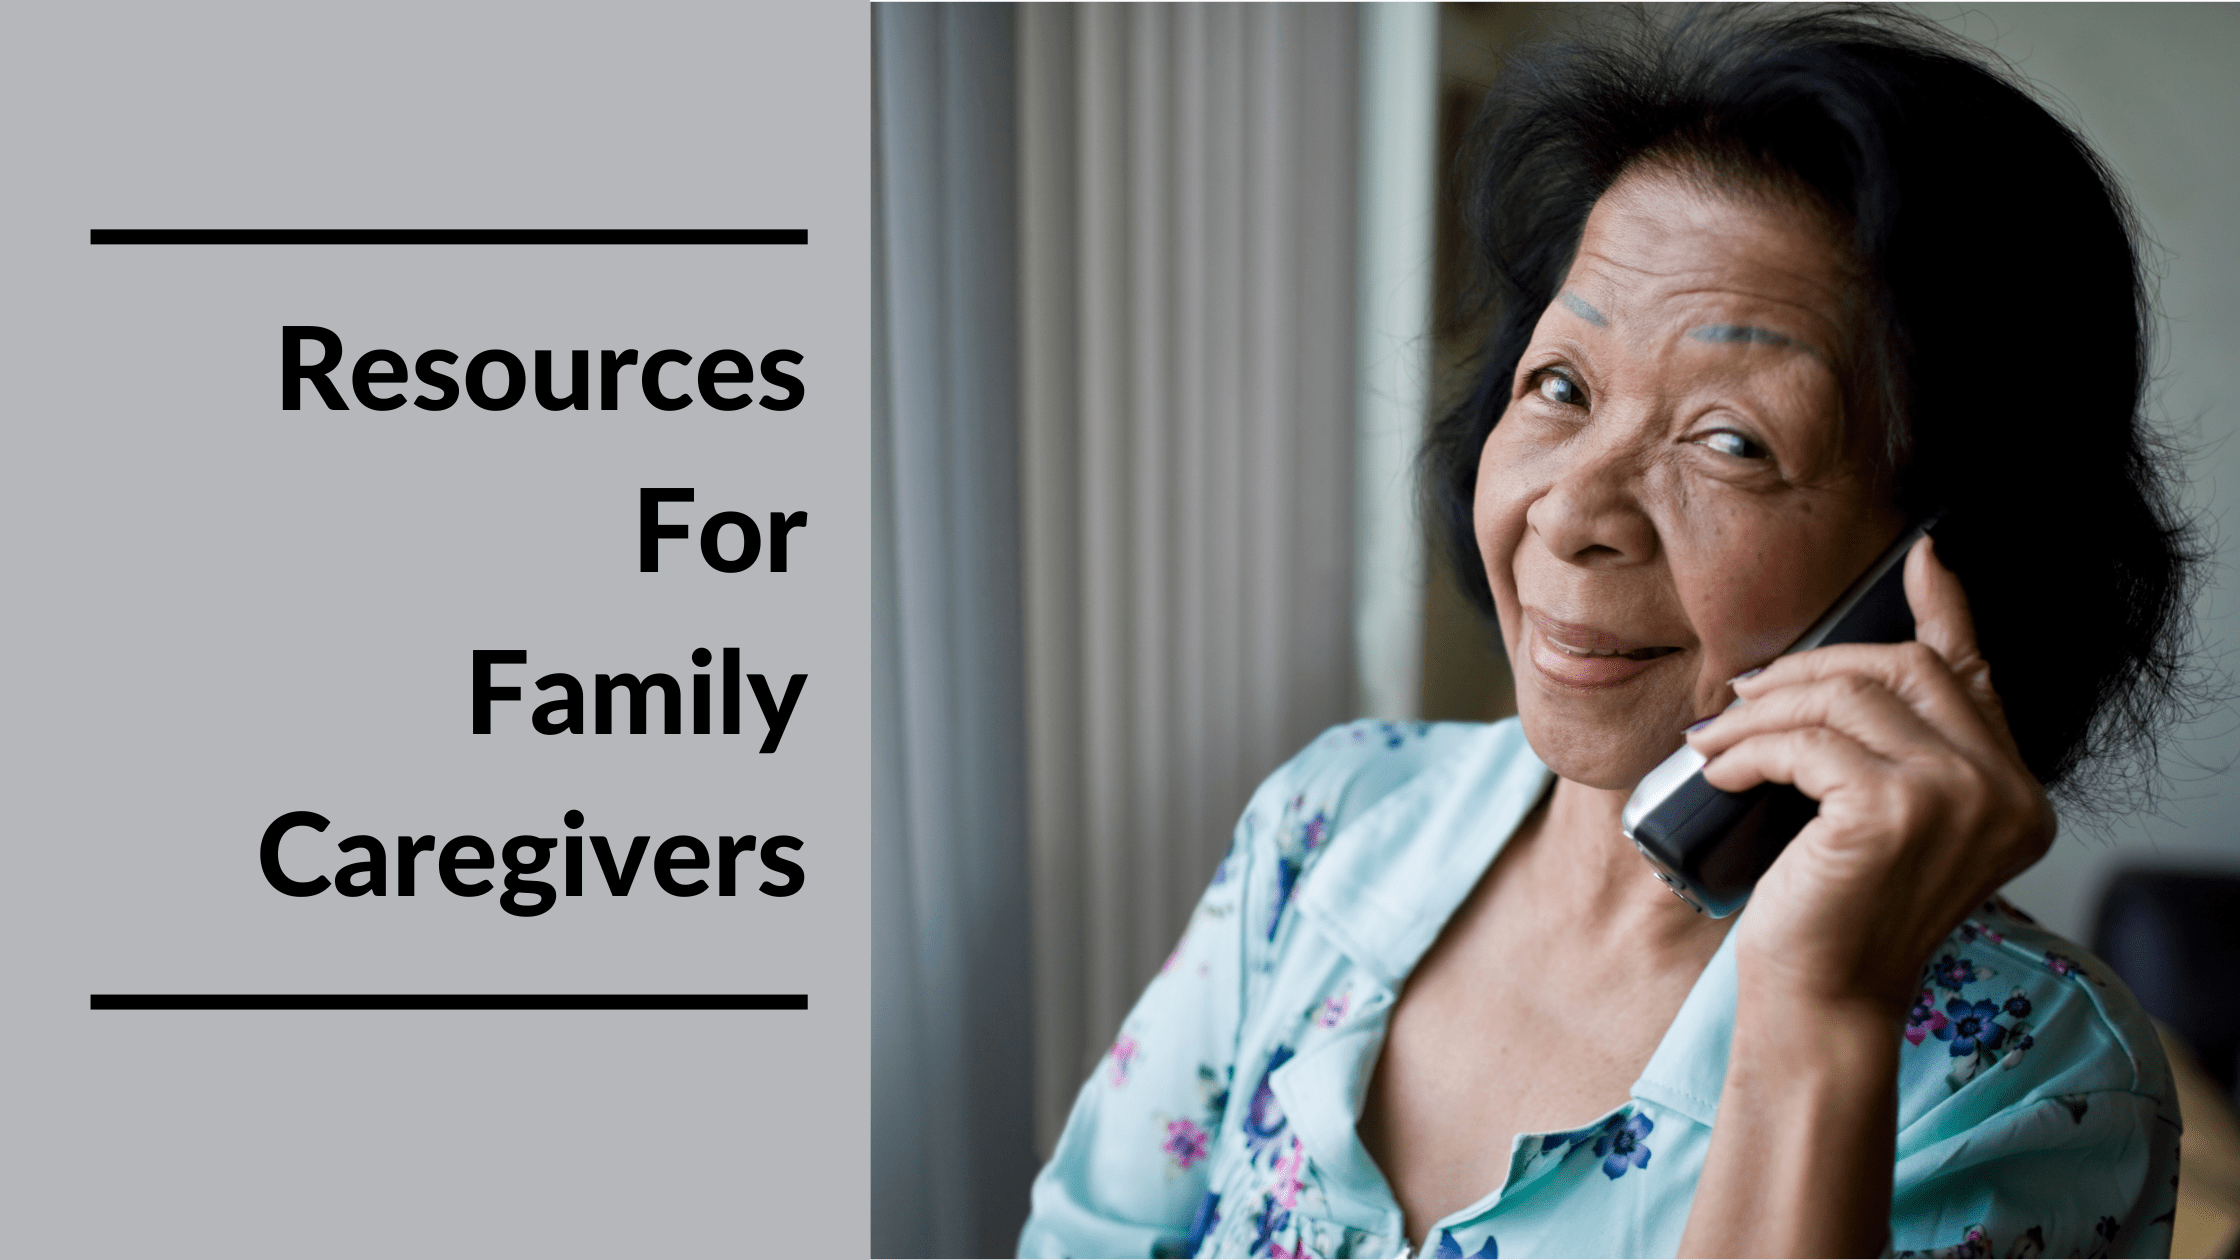 Resources For Family Caregivers Featured Image